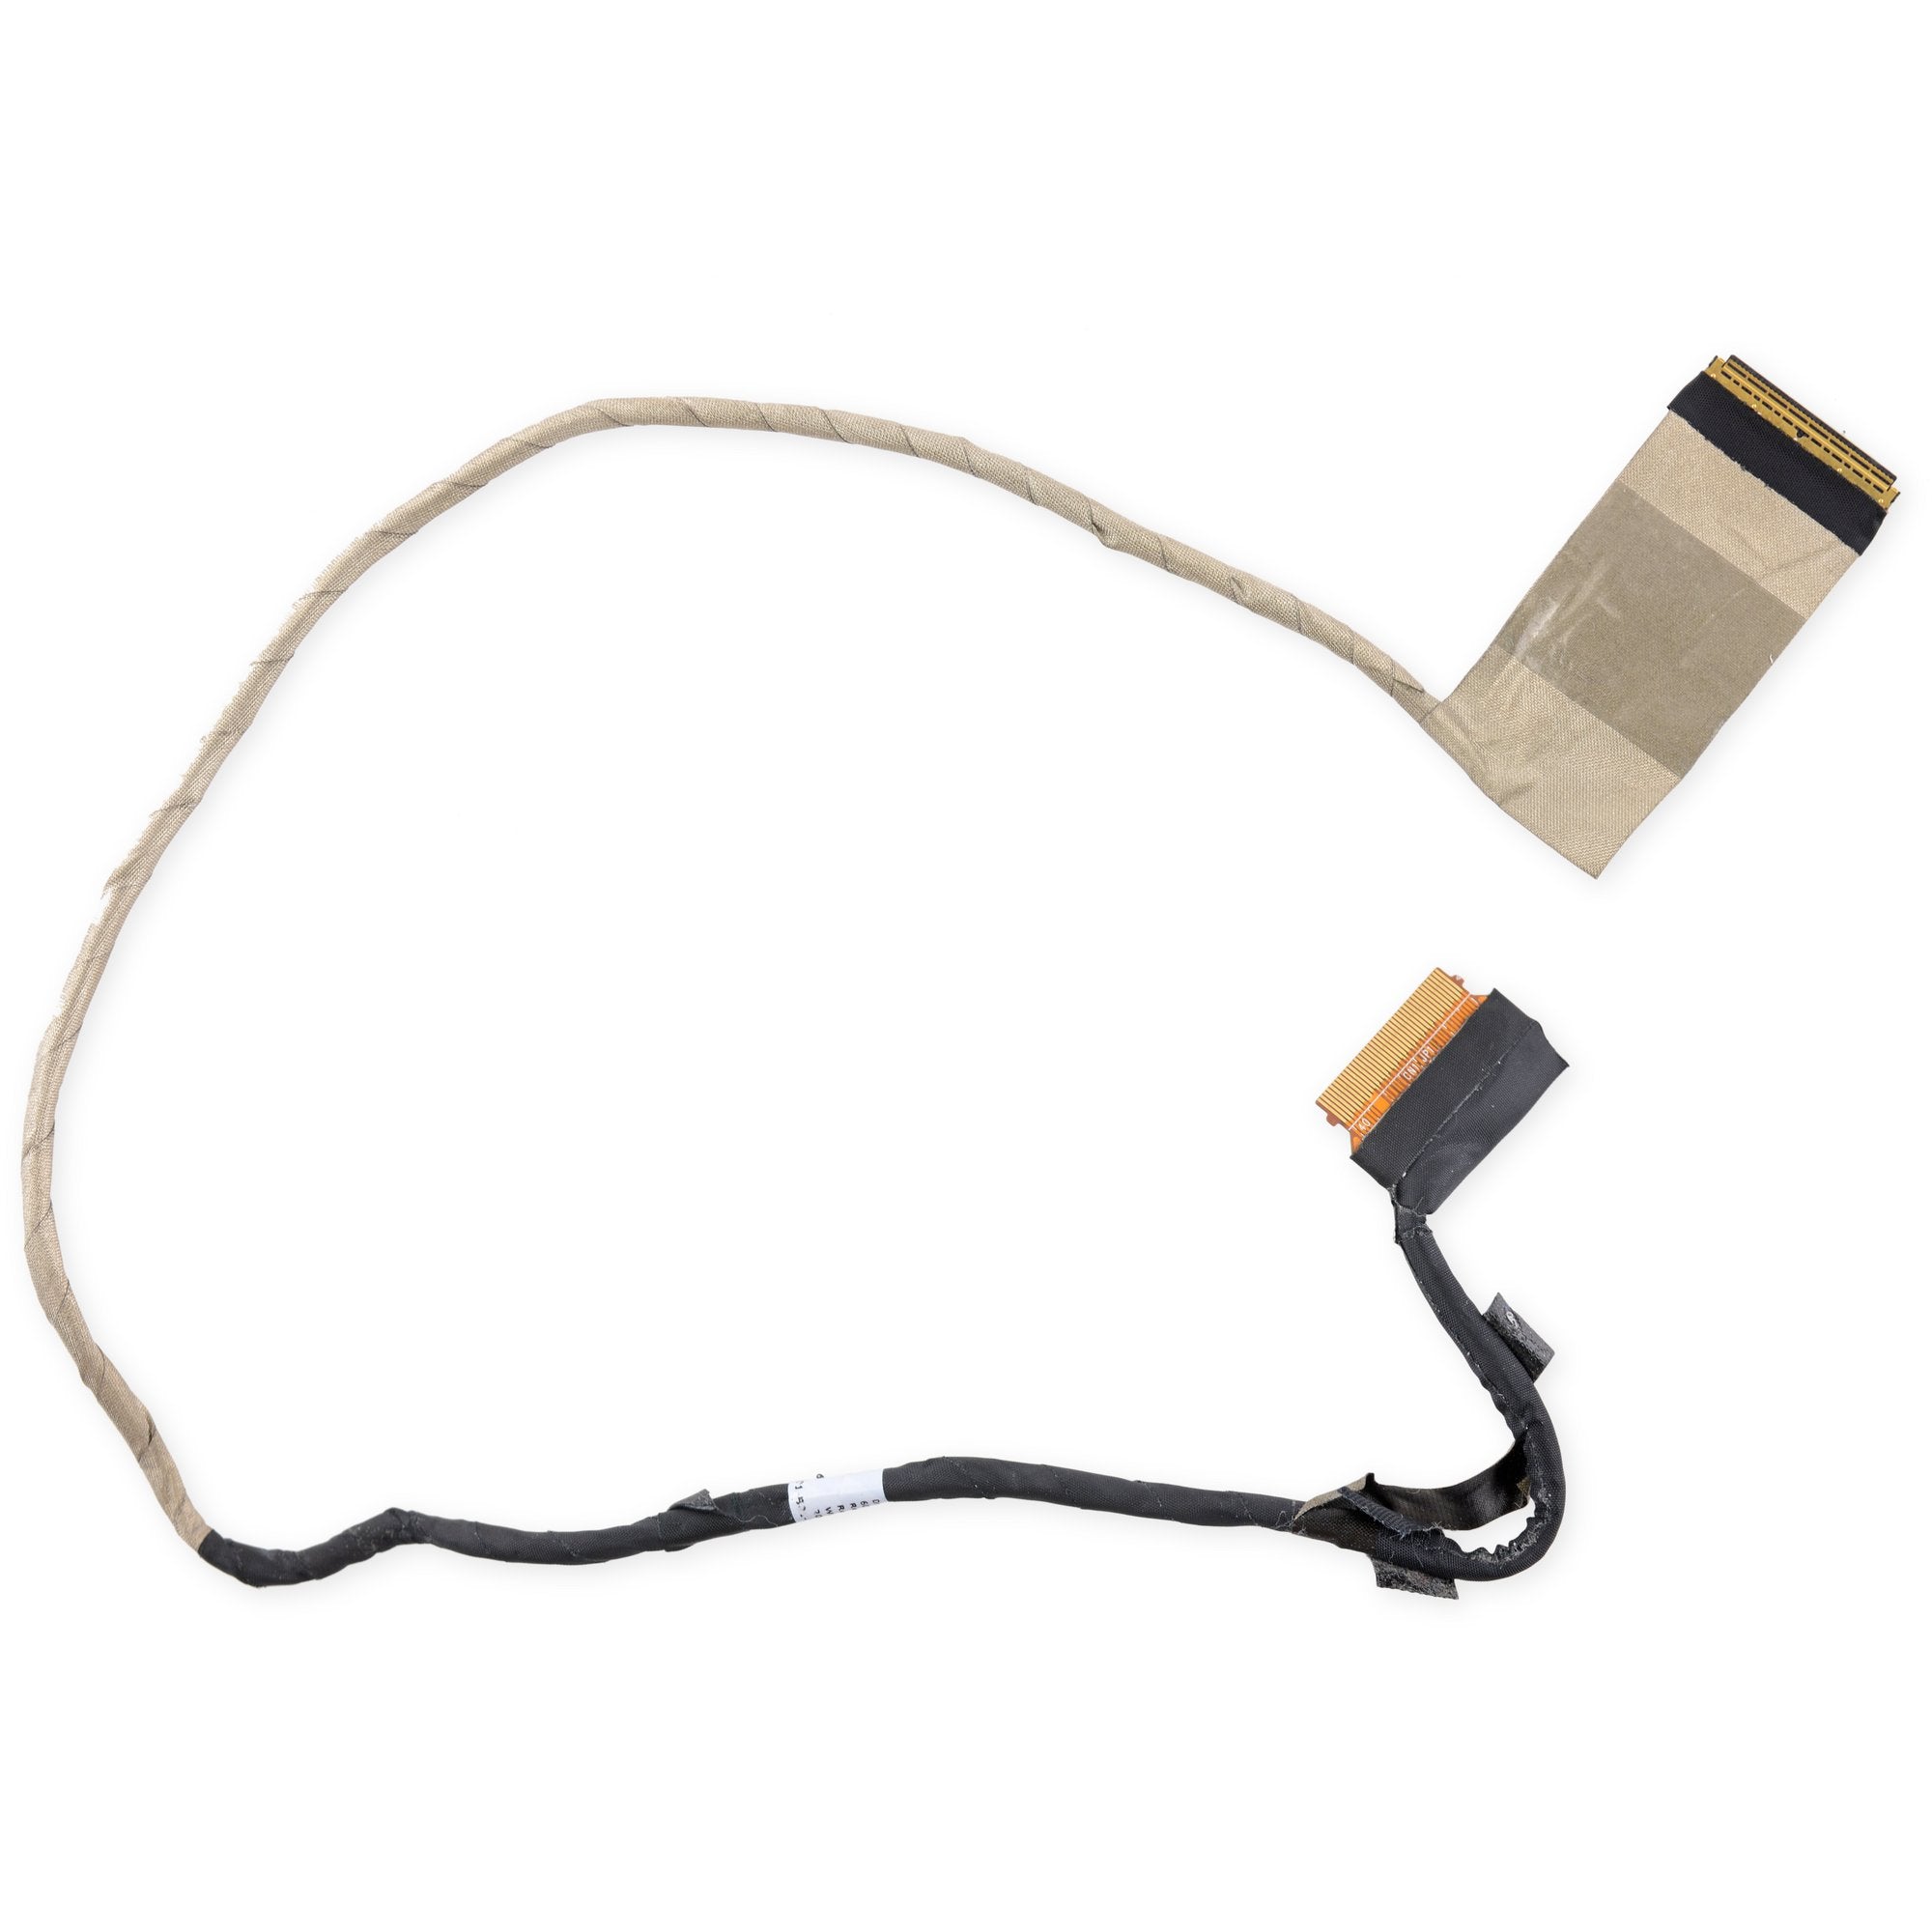 HP ENVY TouchSmart M7-J020DX Display Data Cable